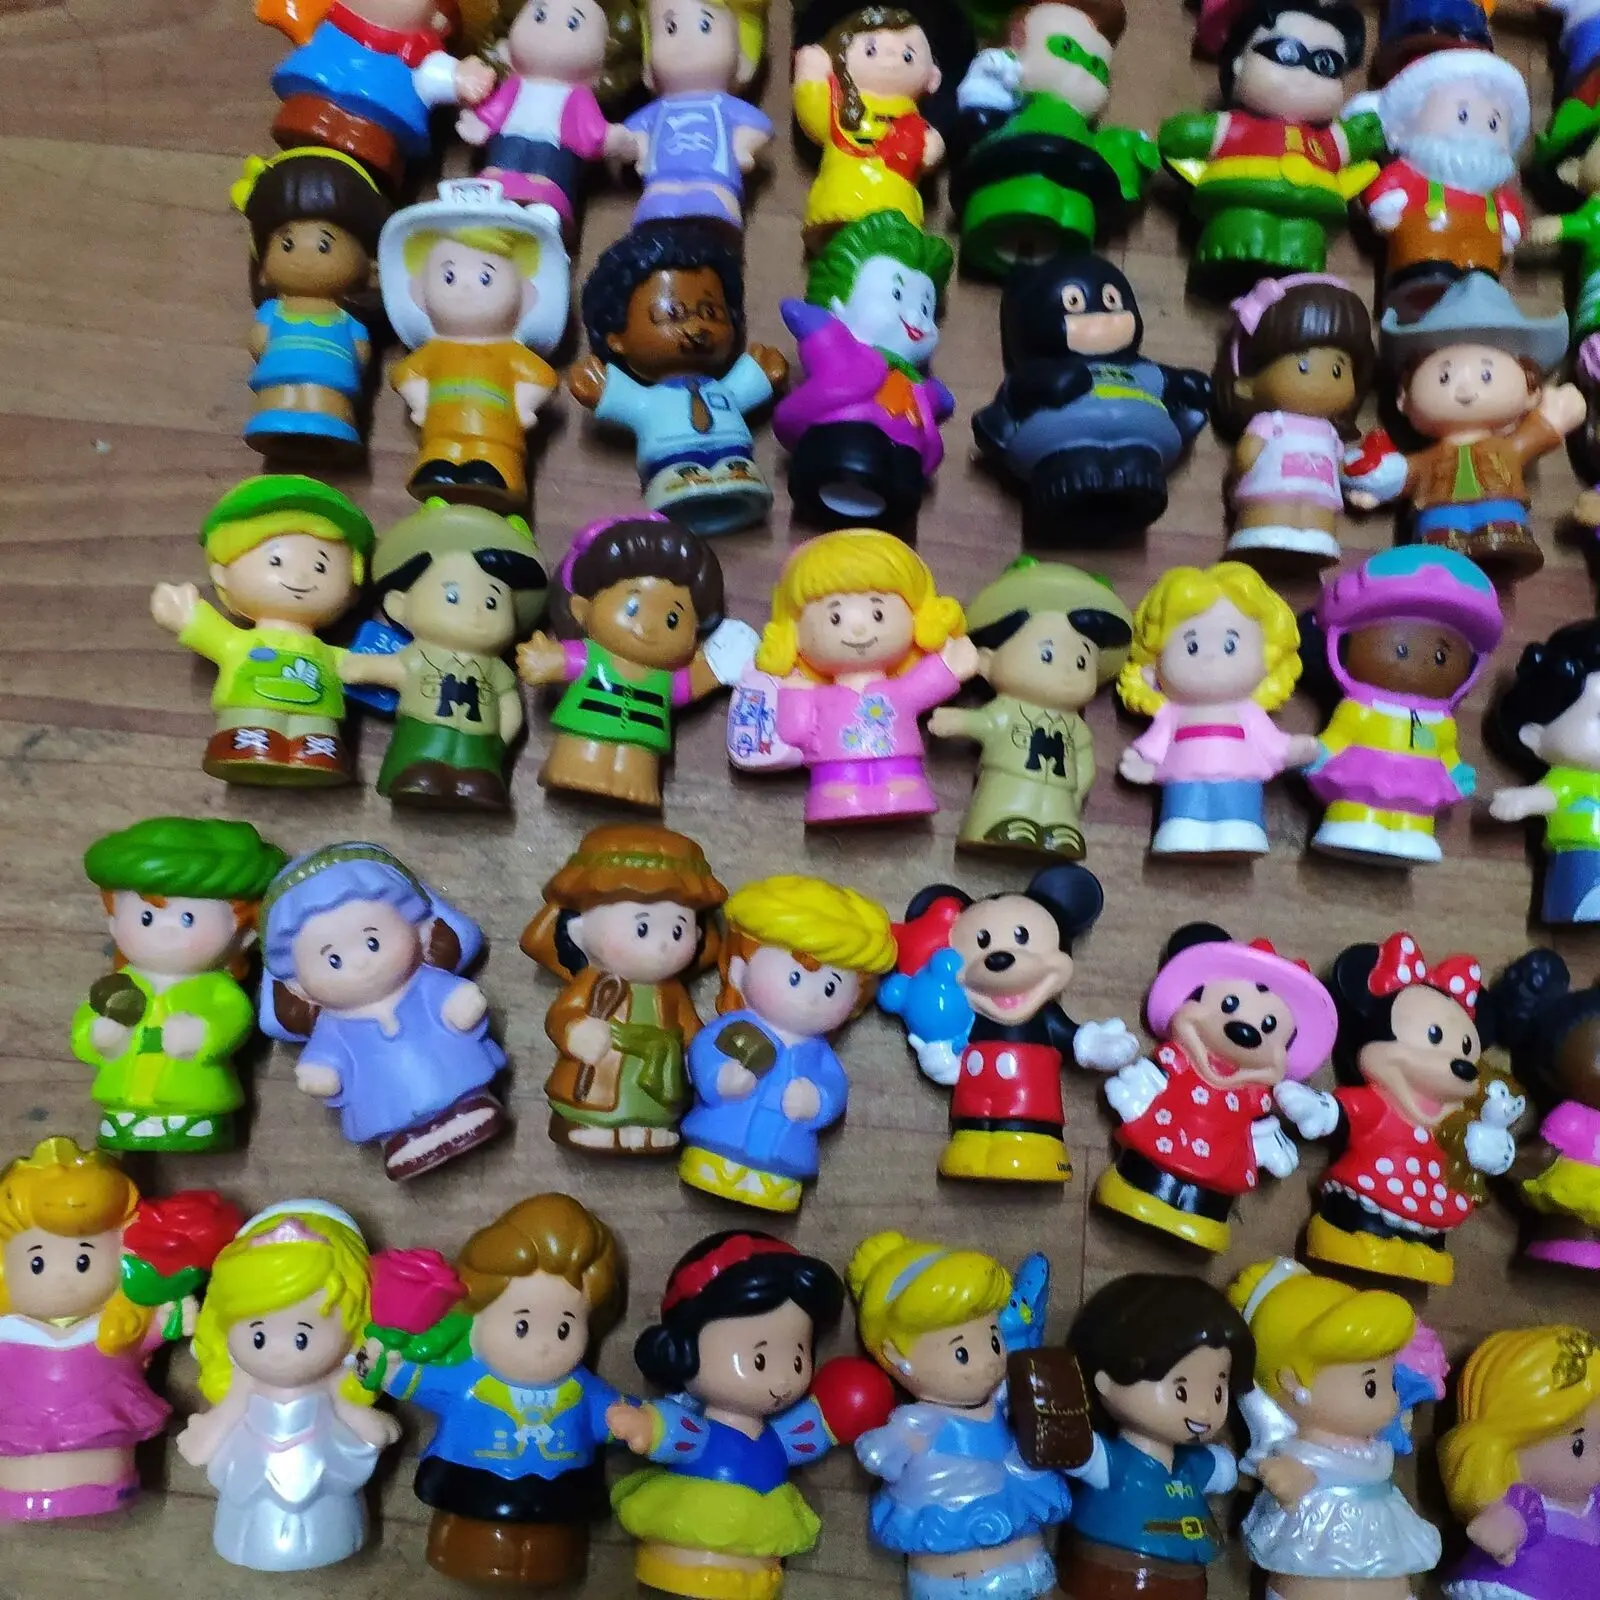 Lot 10pcs Fisher Price Little People Figure Baby Boy Girl Toy random no repeat 